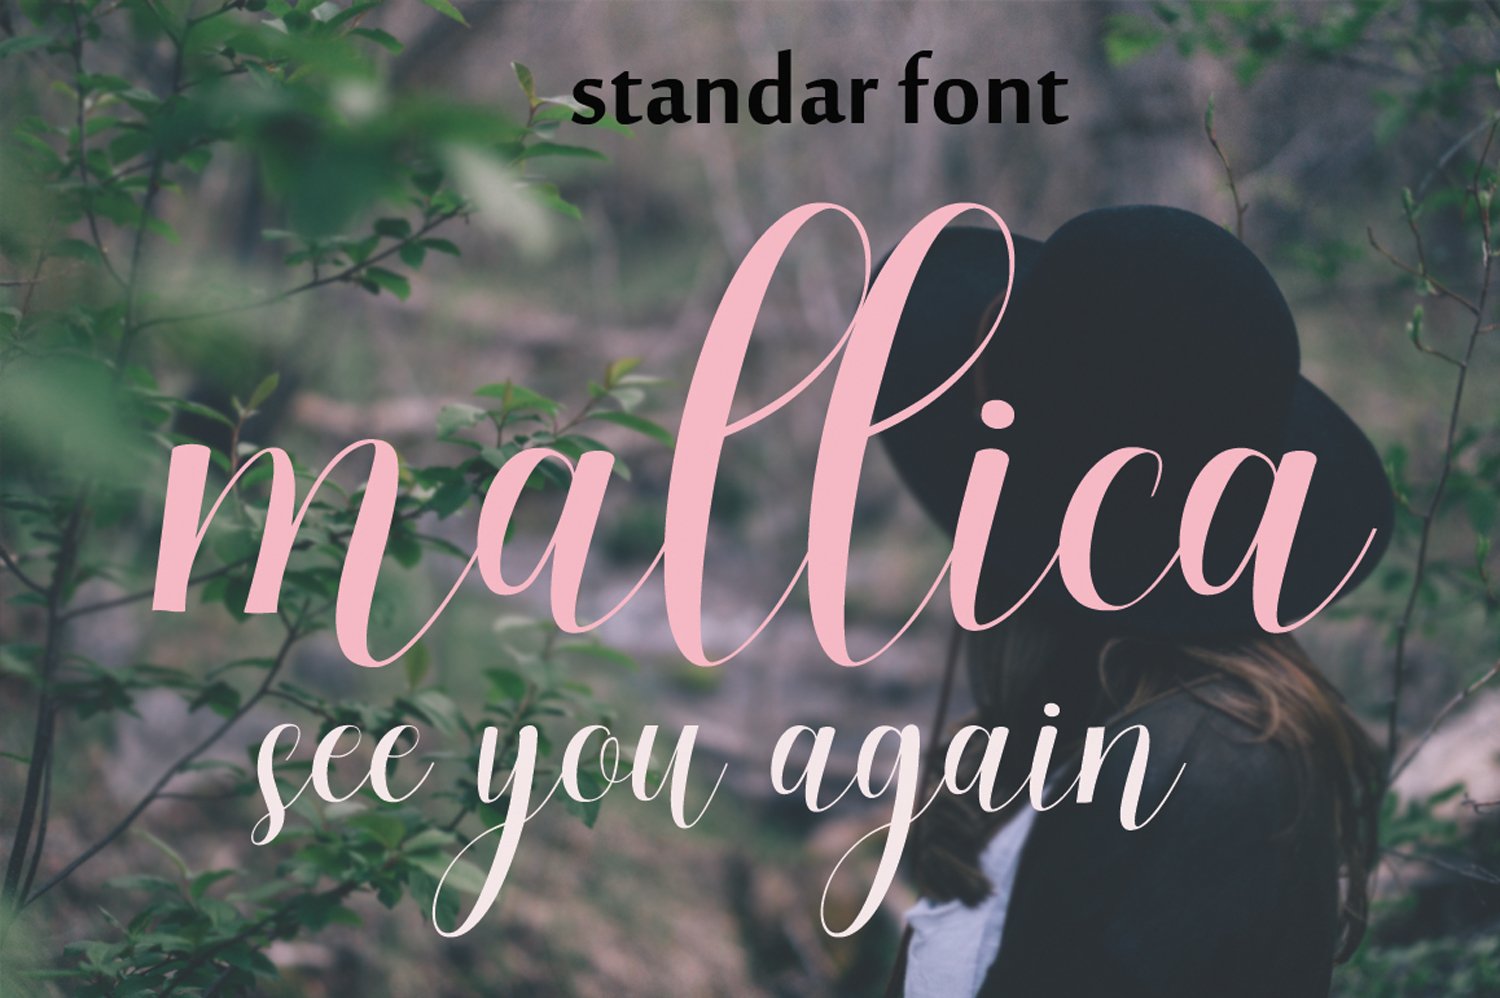 Pink and white calligraphy "Mallica see you again" on the beautiful image.